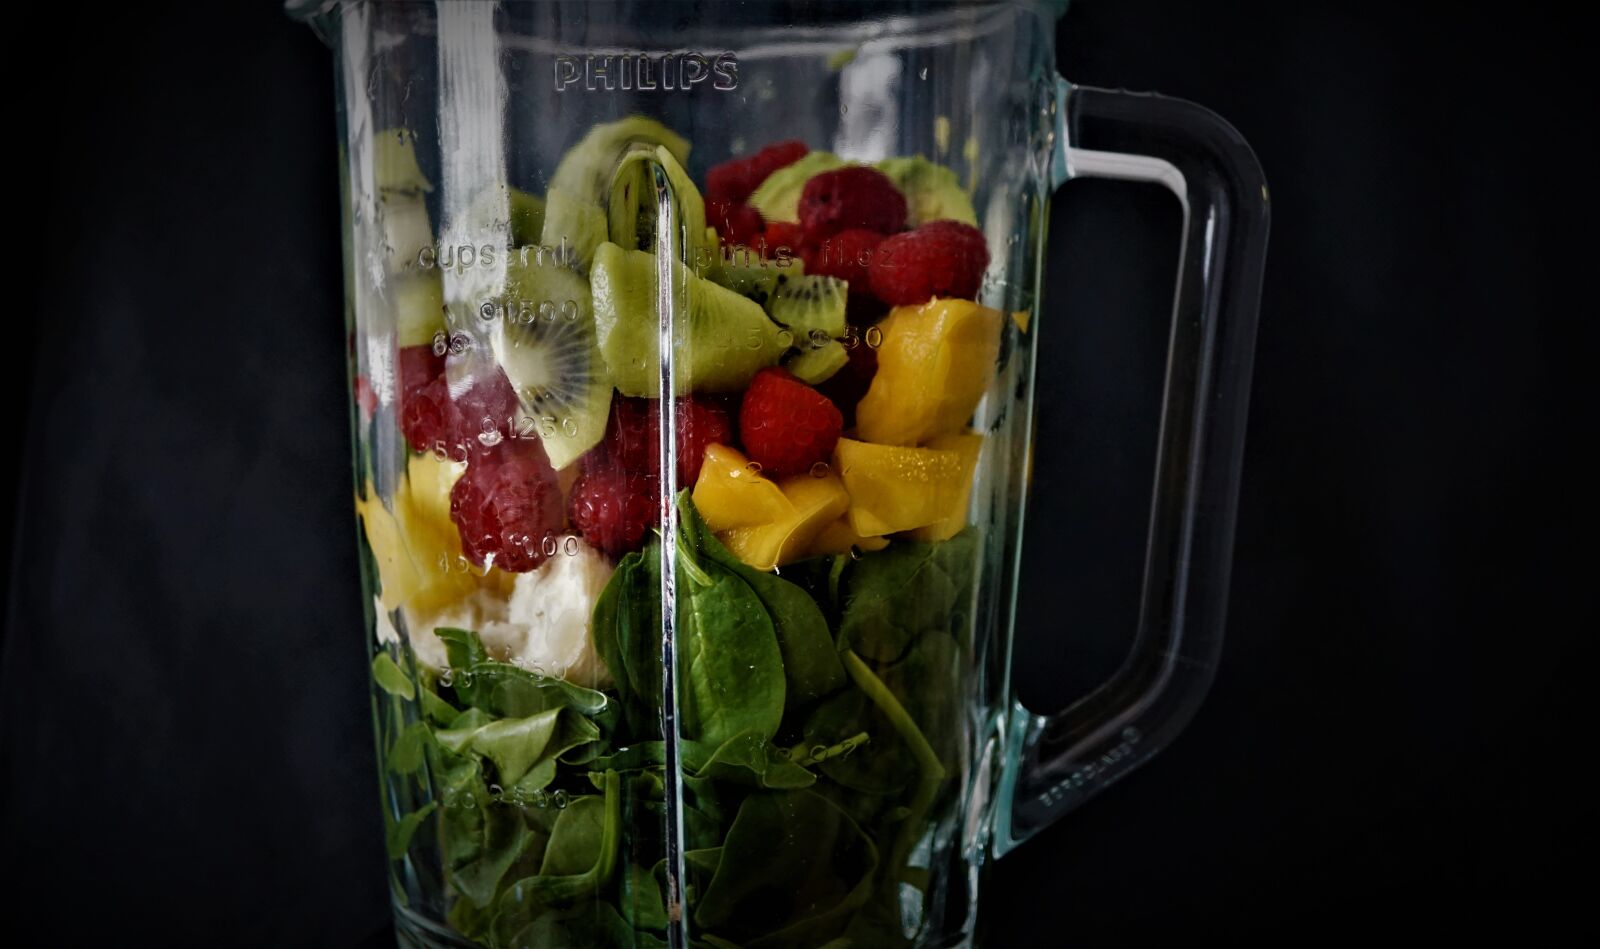 Sony a6000 sample photo. Smoothie, mixer, fruit photography